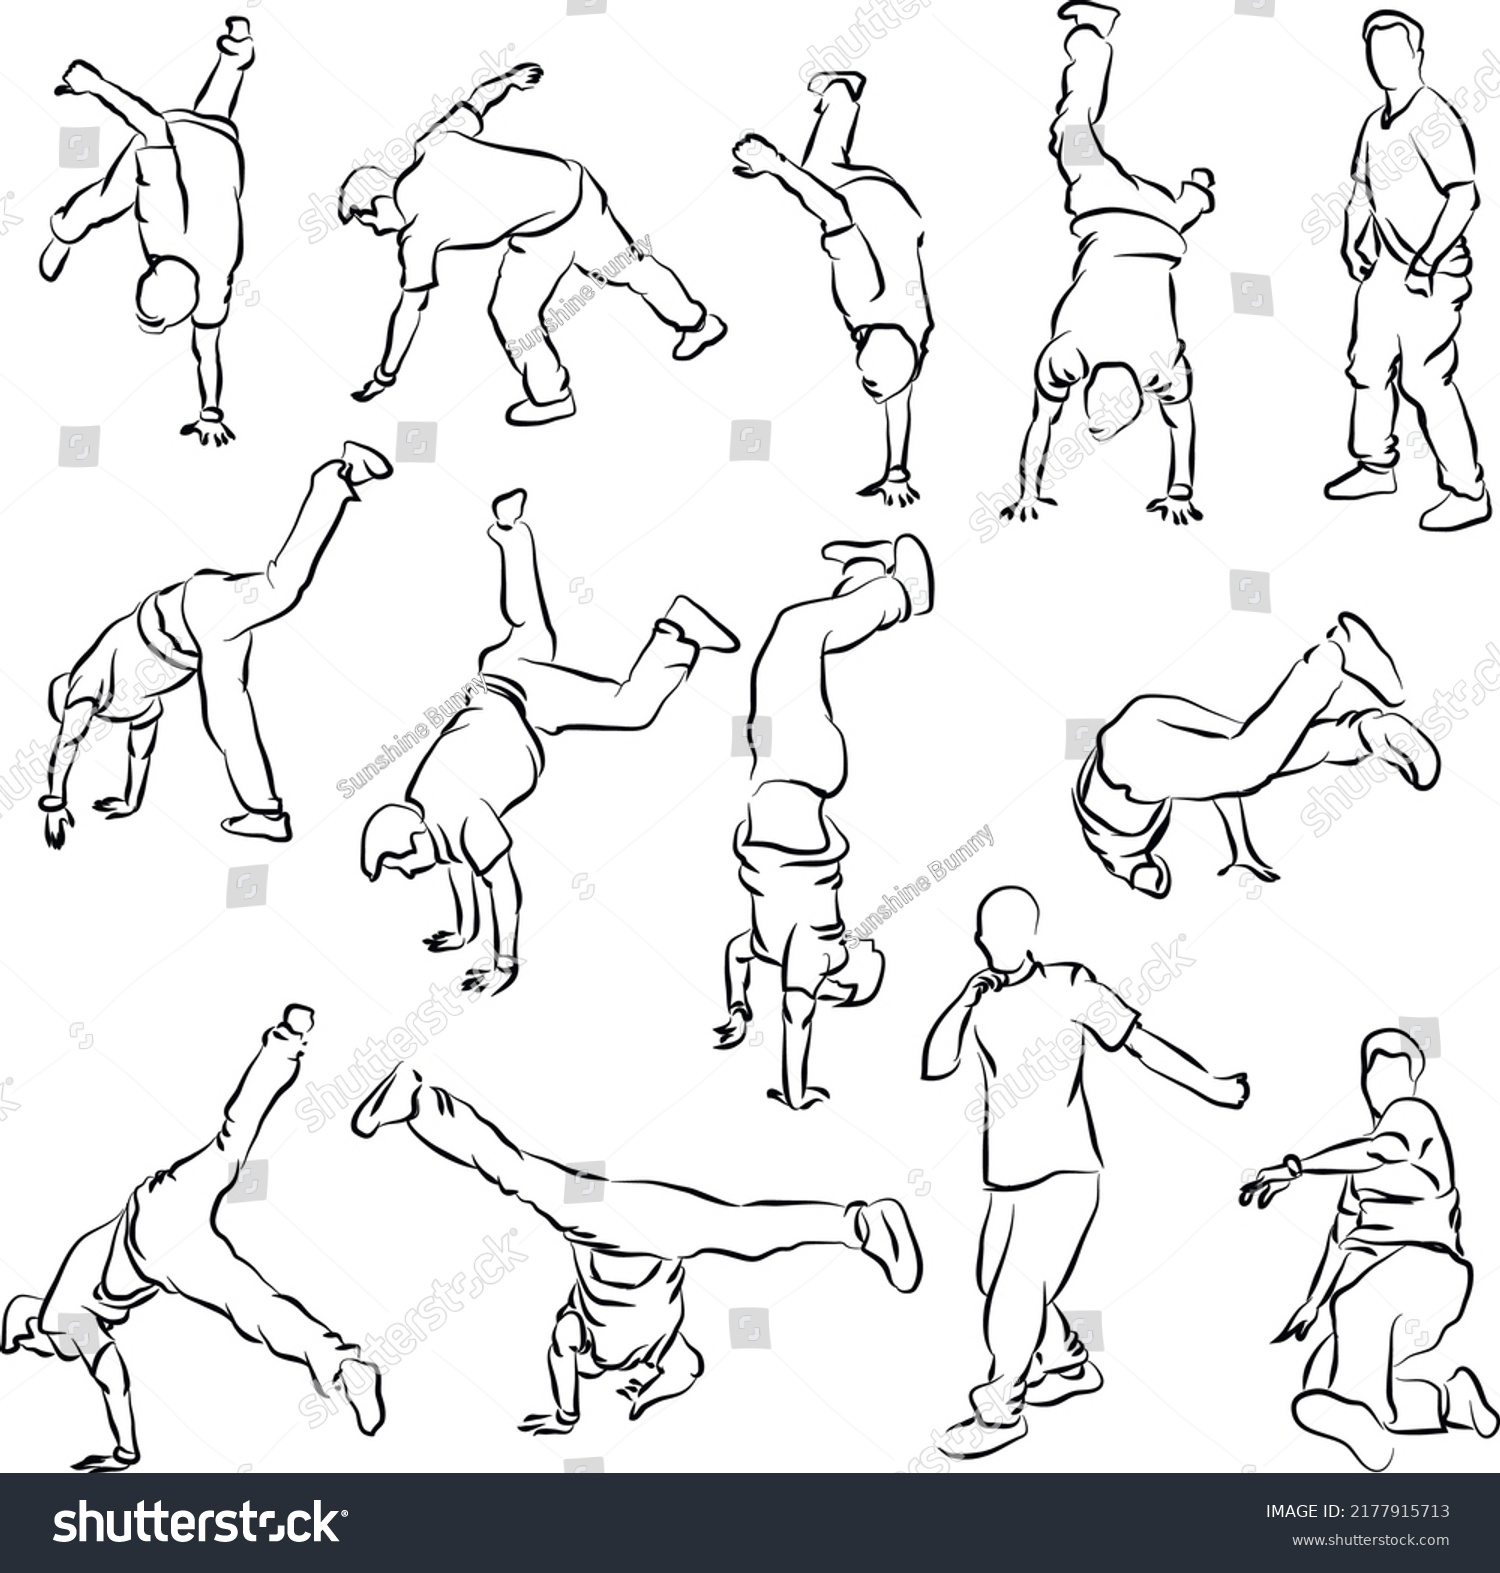 SVG of set of breakdance dancers silhouettes isolated on white background. street dance silhouette. Fictional character and plot svg